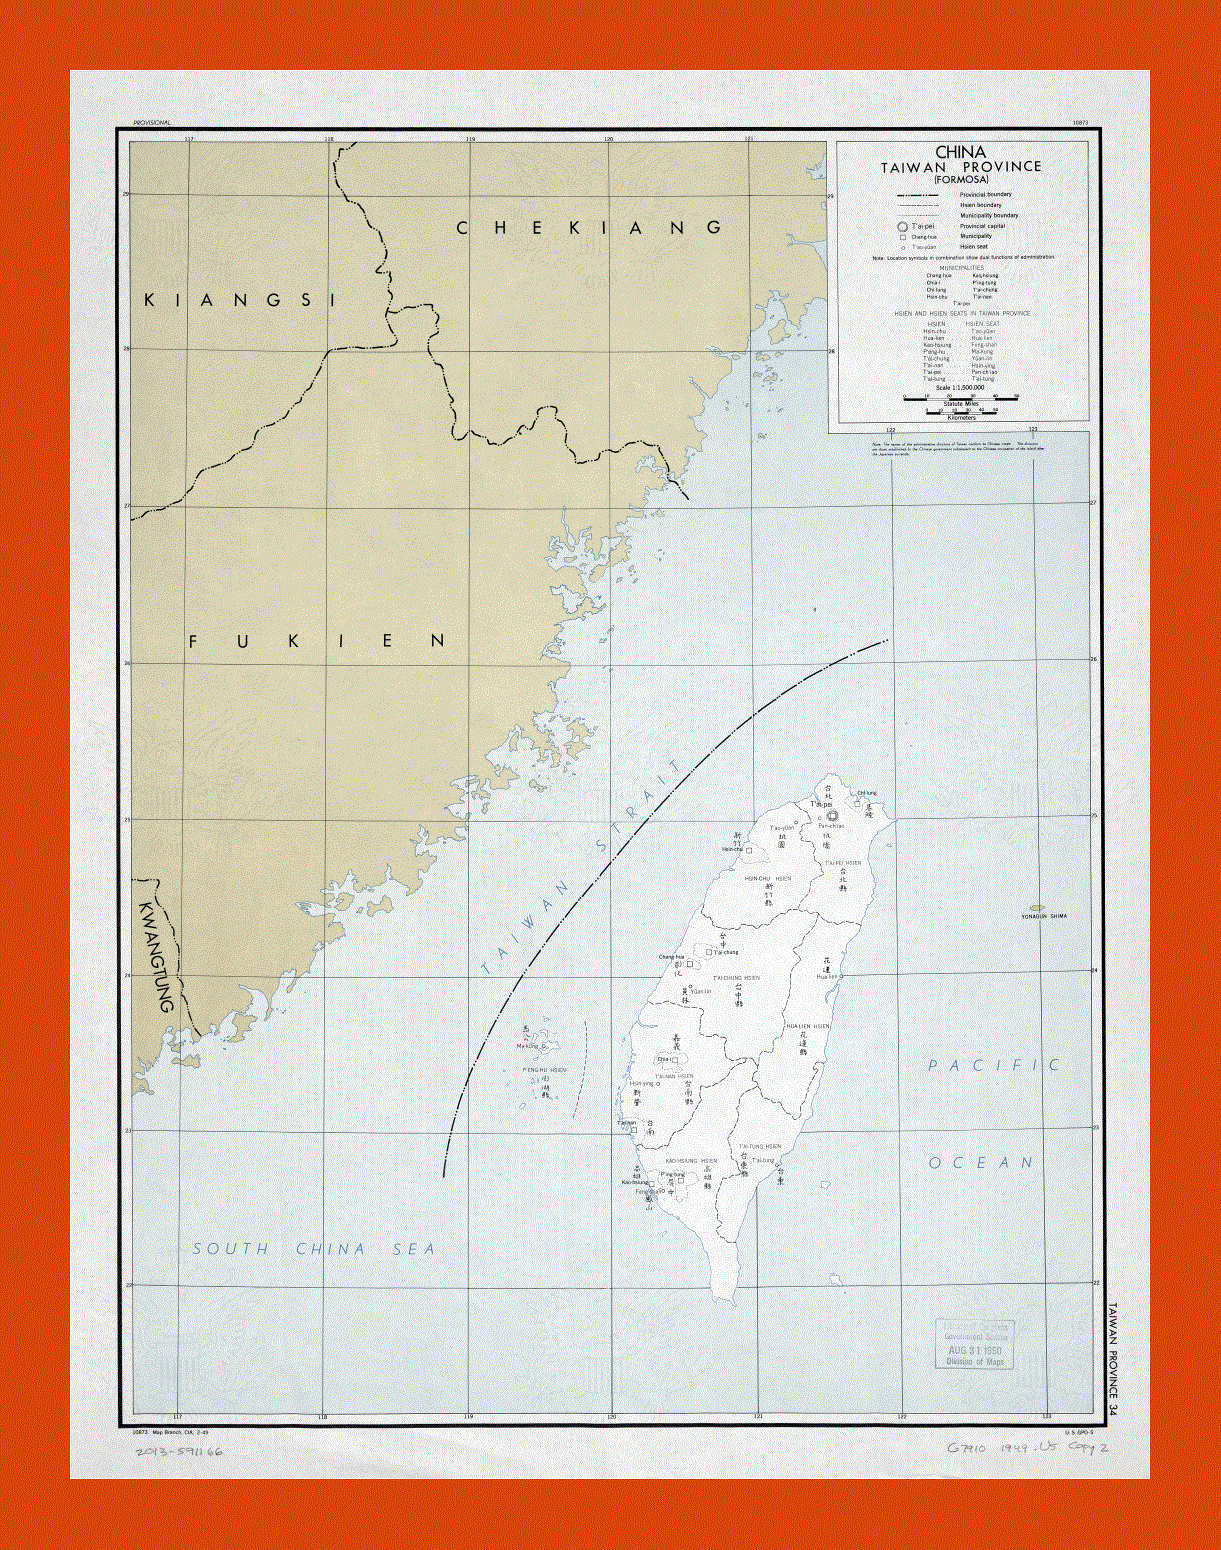 Old political and administrative map of China, Taiwan province (Formosa) - 1949